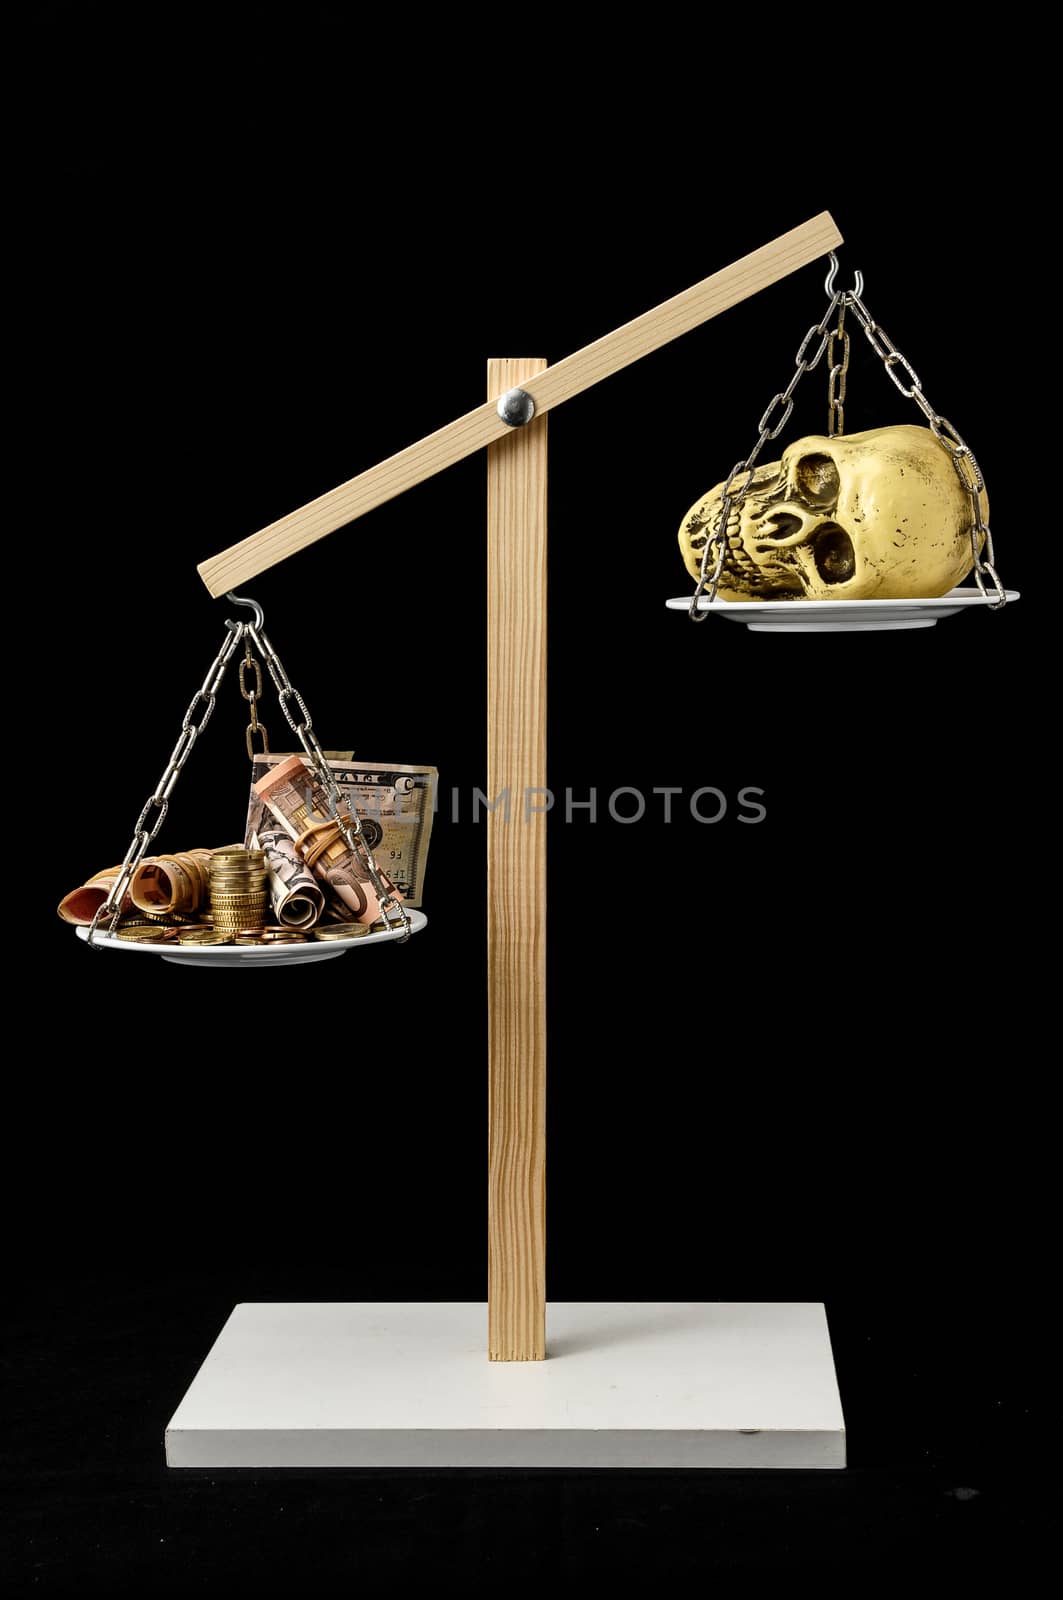 Skull and Money on a Two Pan Balance